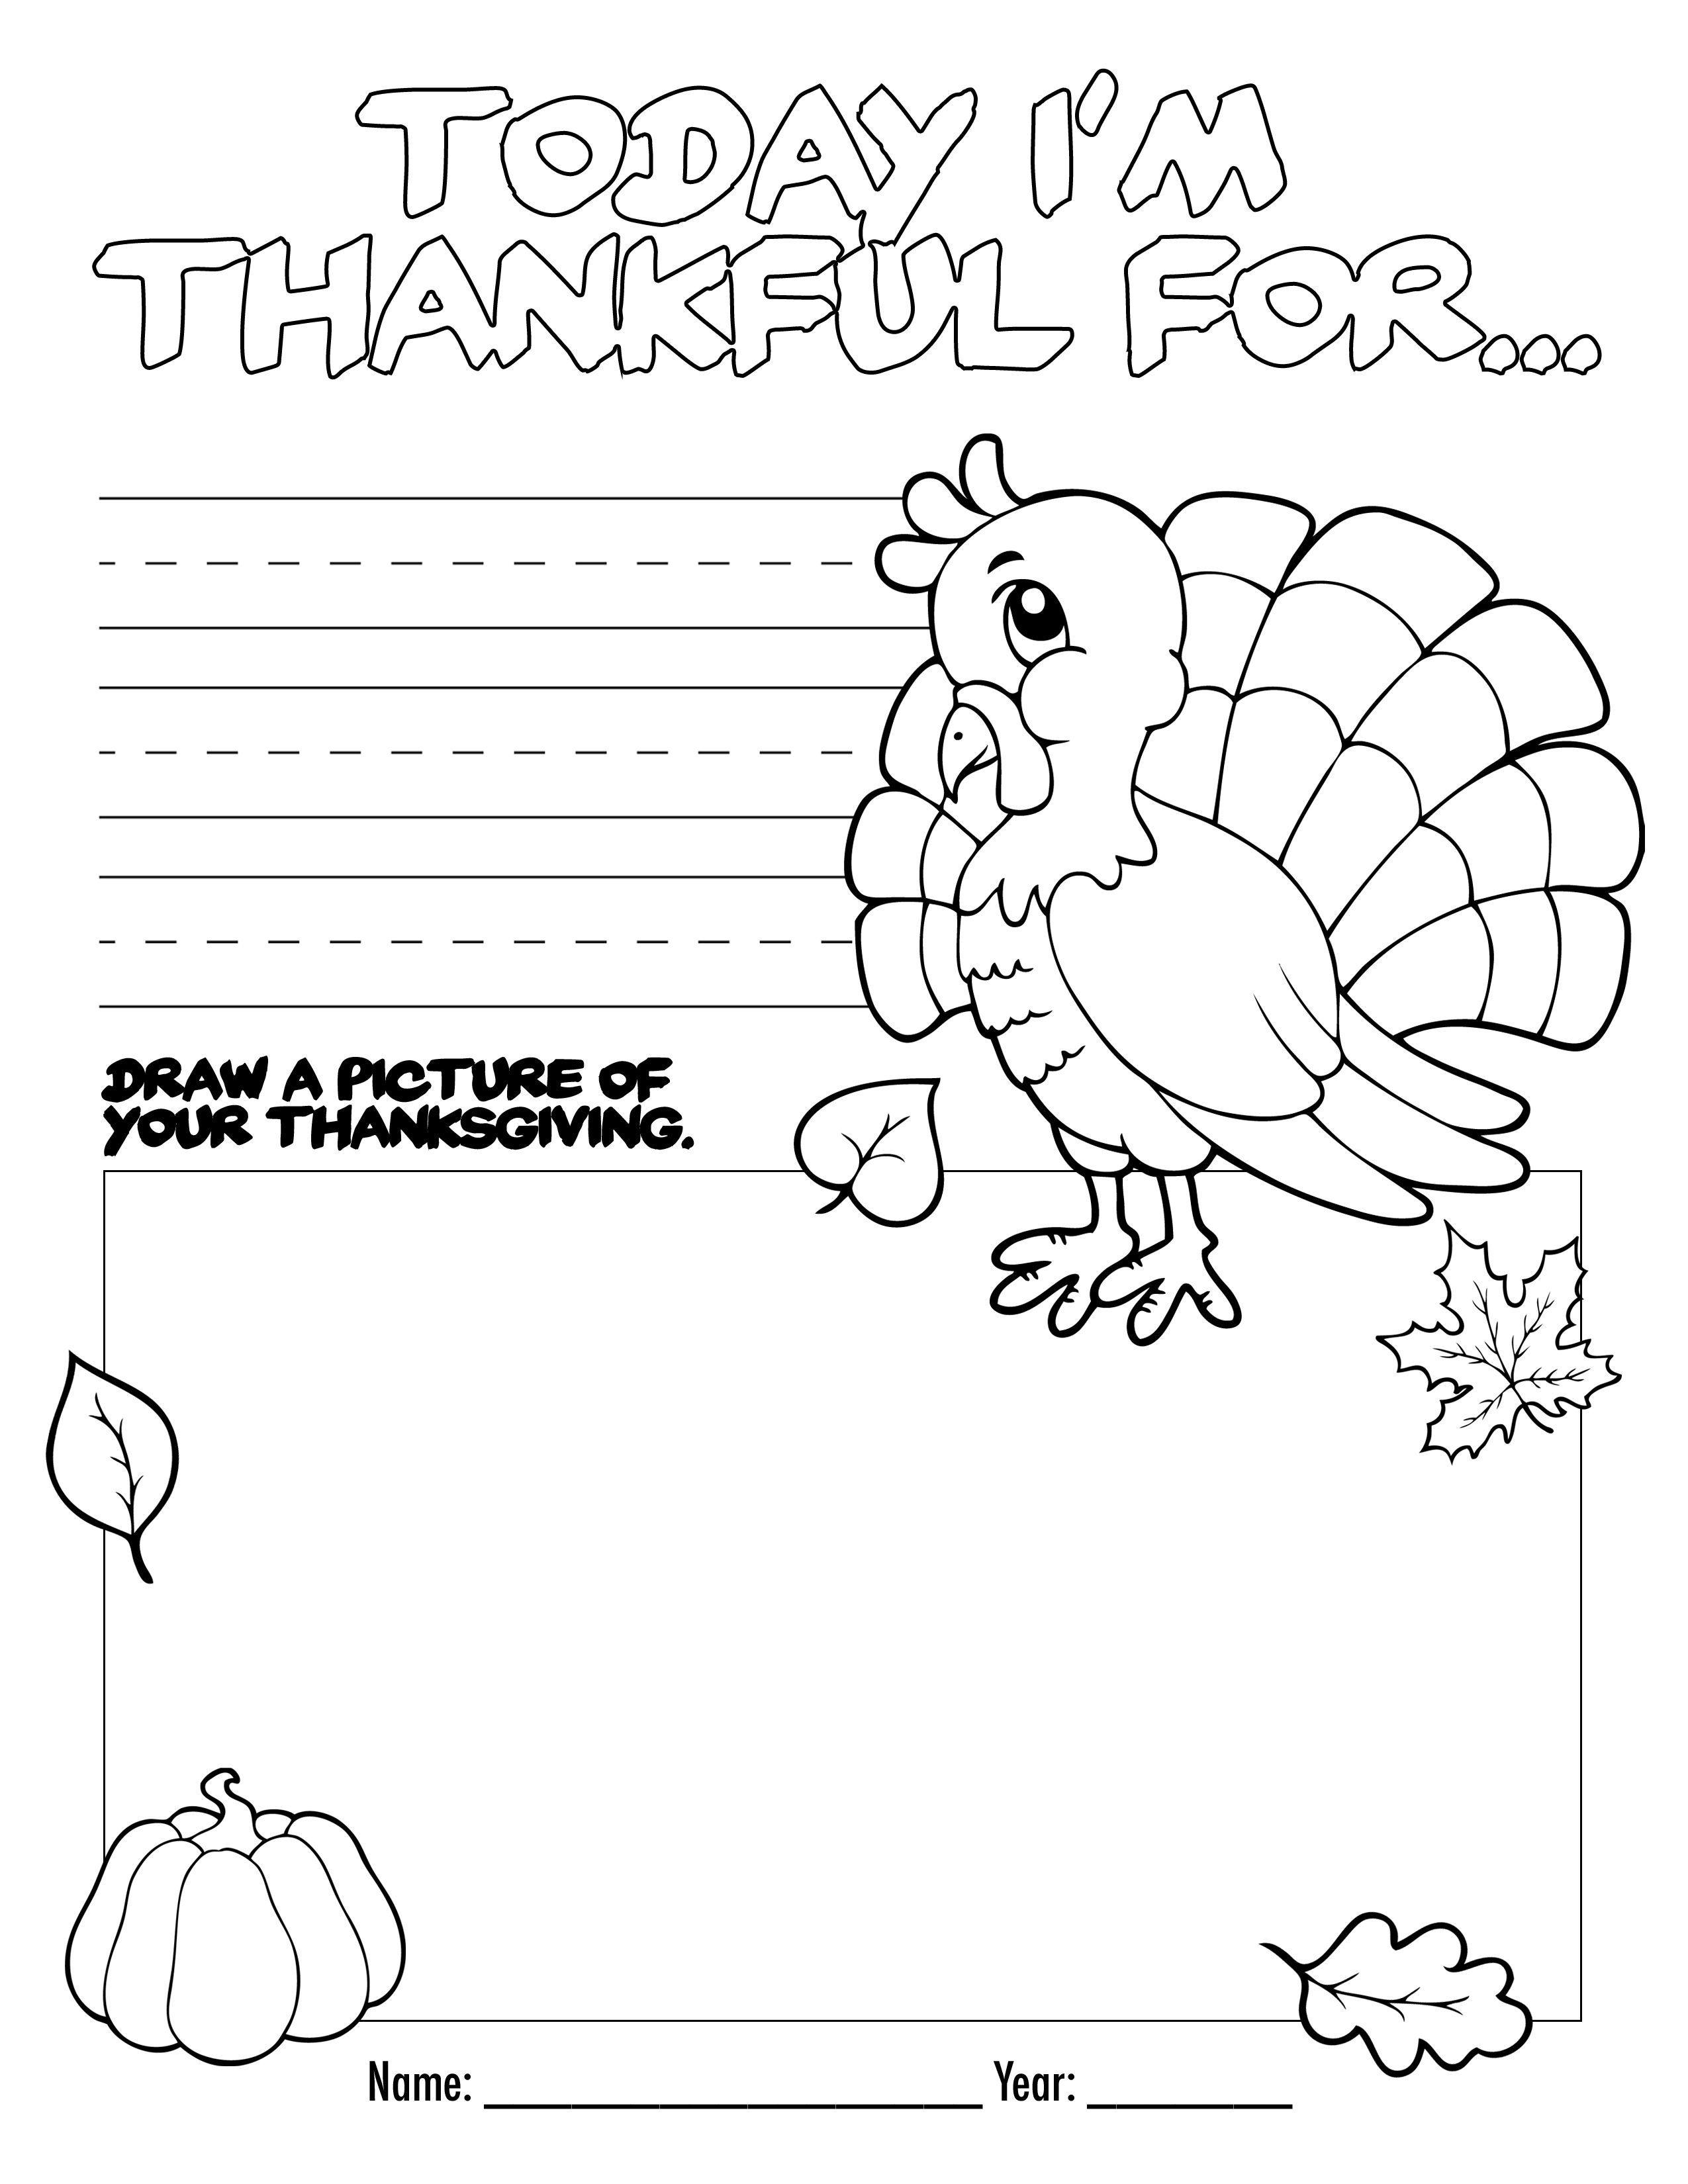 Thanksgiving Coloring Book Free Printable For The Kids! | Bloggers - Free Printable Thanksgiving Books